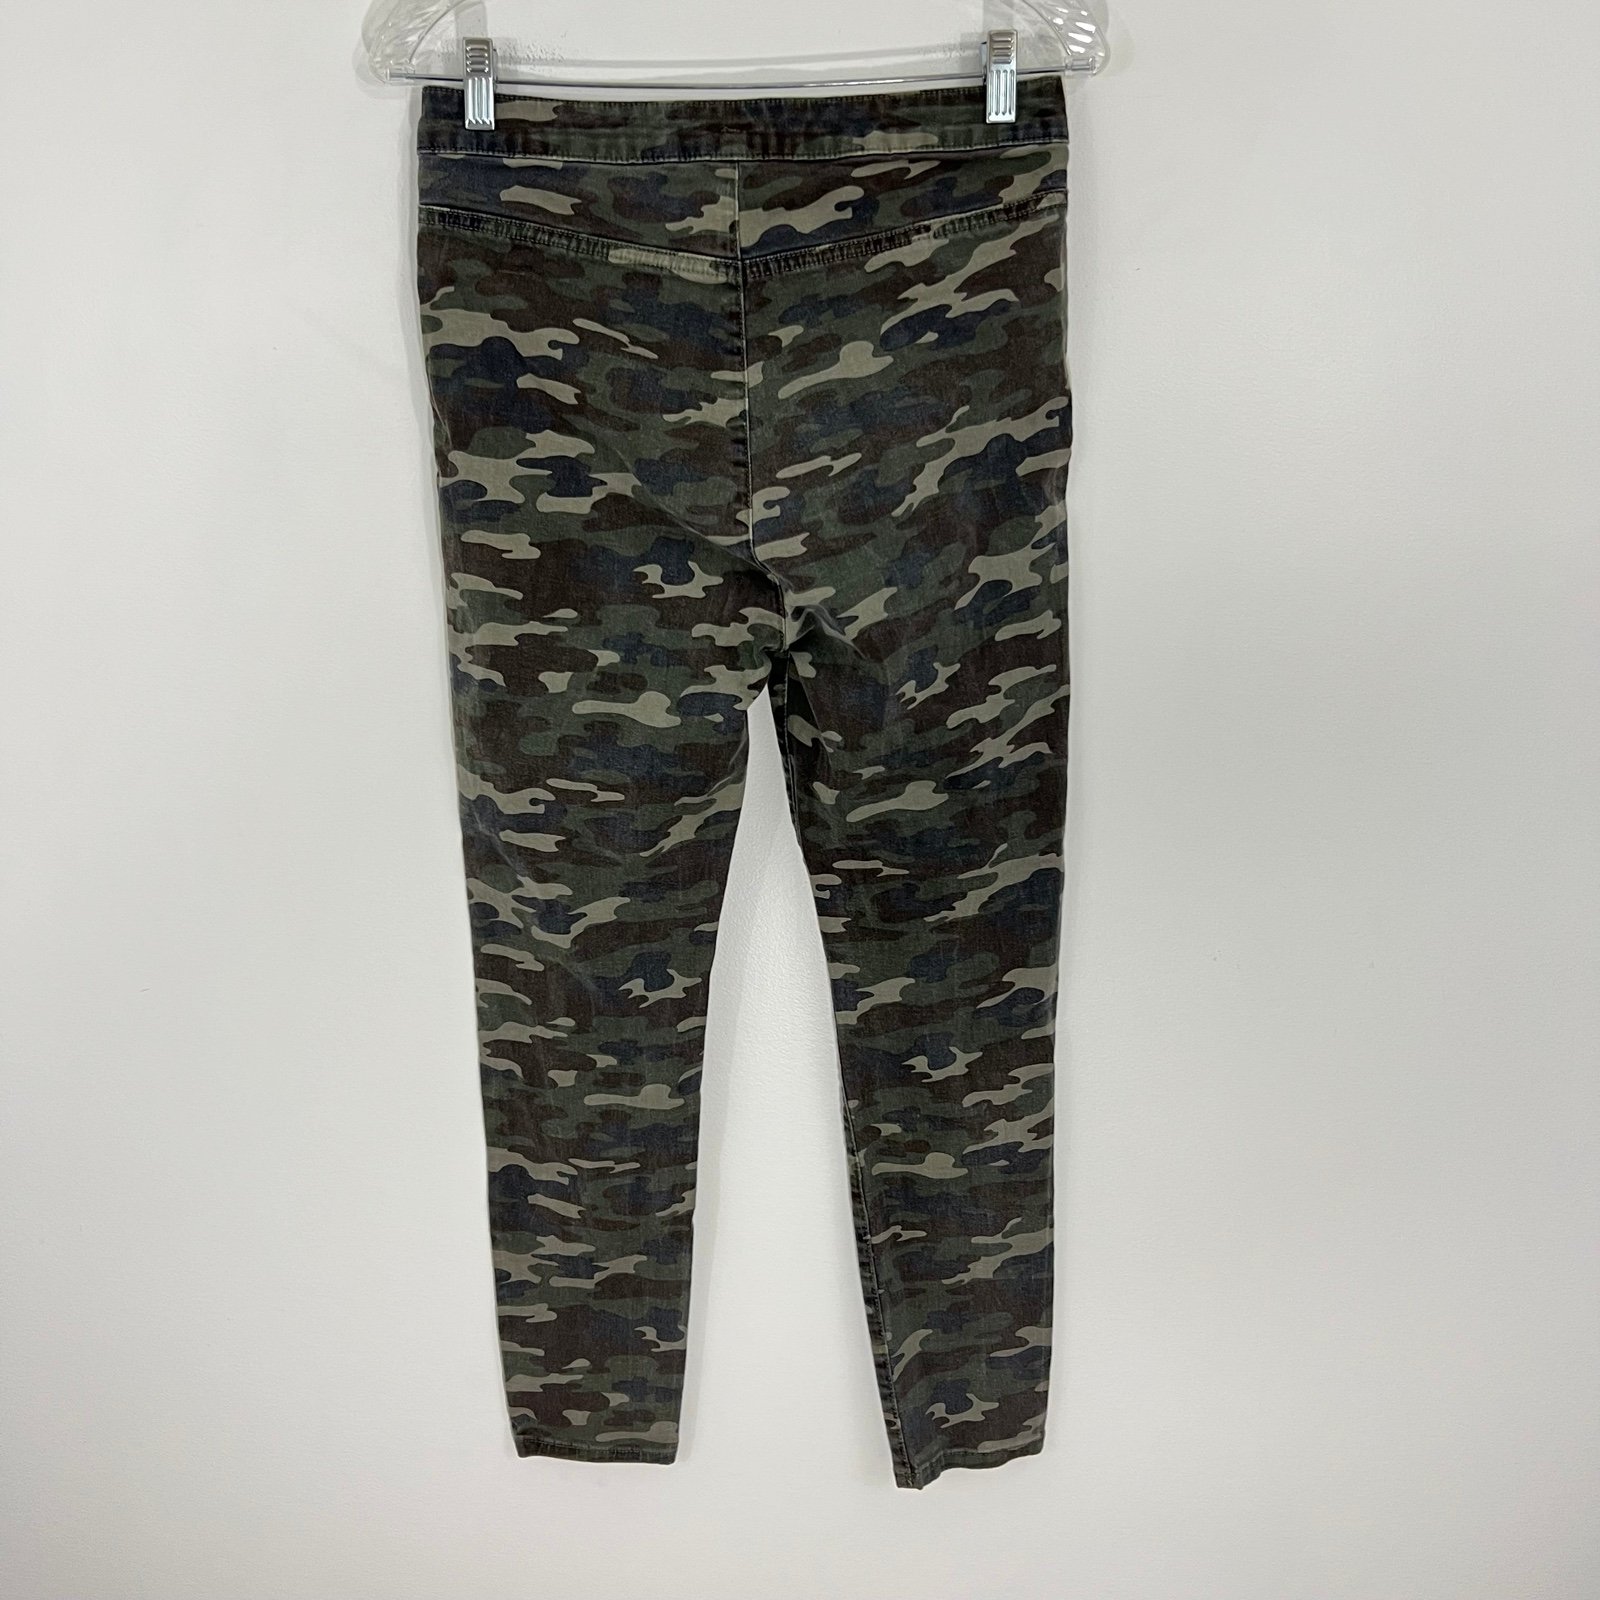 Fashion Free People Belle Camo High Rise Skinny Jeans Size 28 FH78zfUqt just buy it